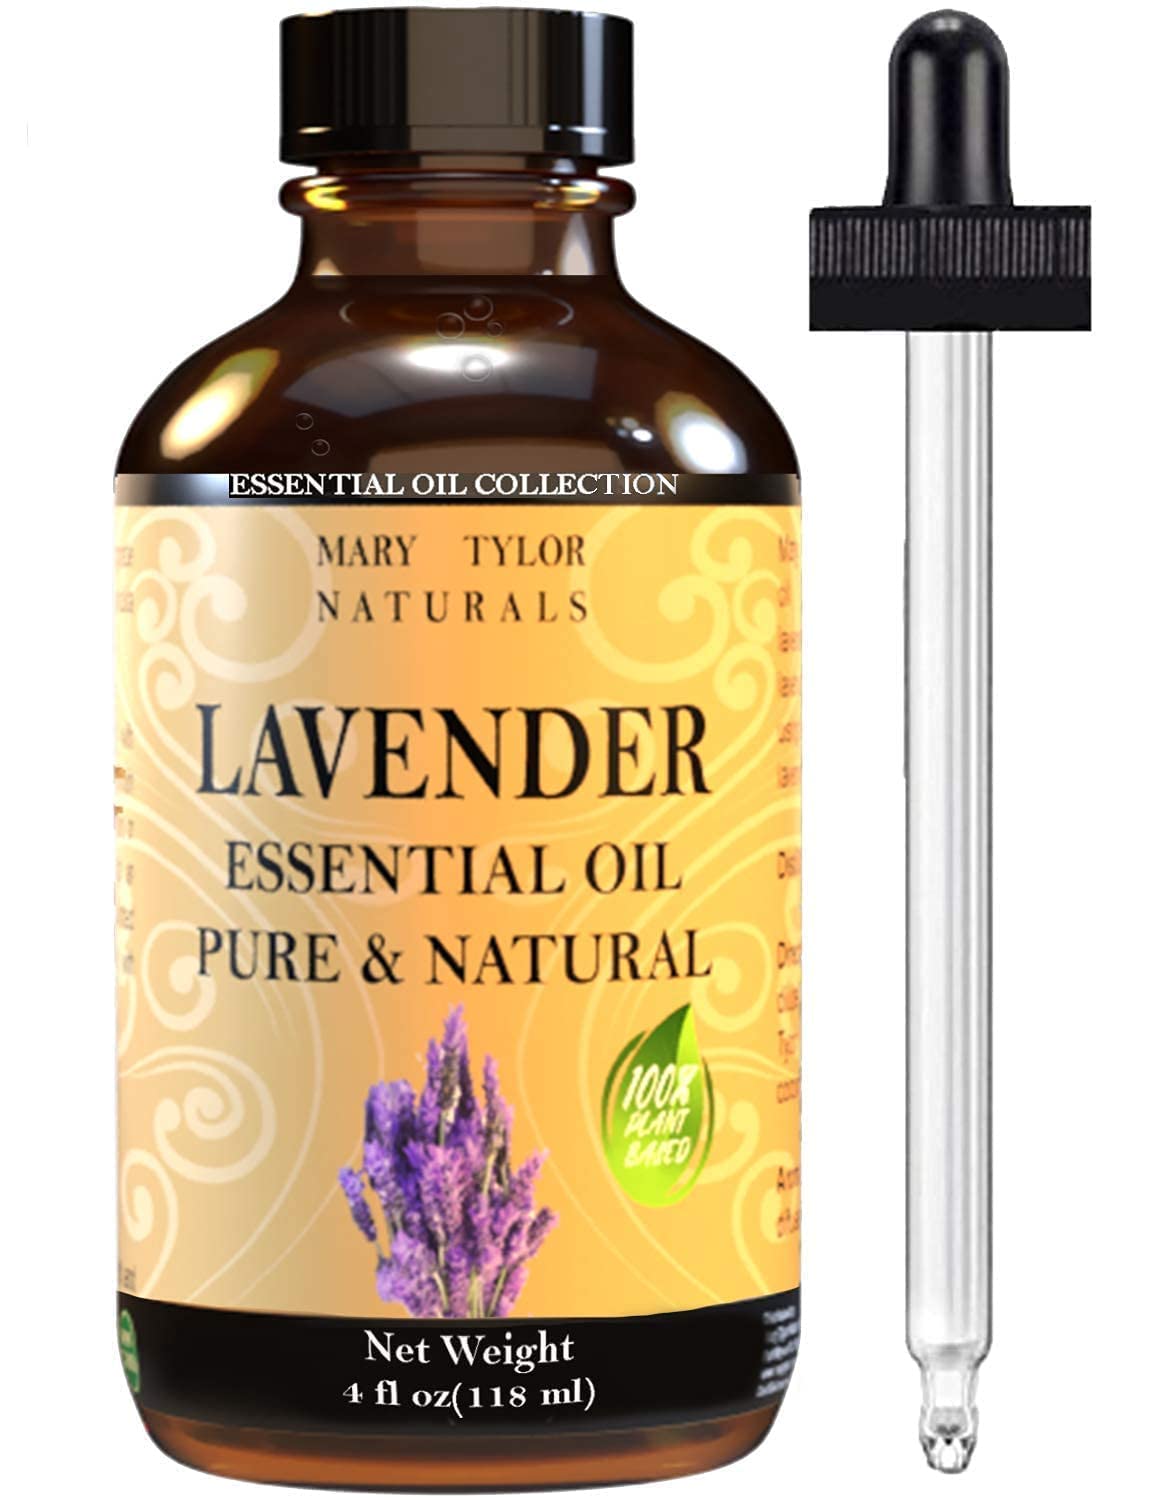 Lavender Essential Oil (4 oz) Premium Therapeutic Grade, 100% Pure and Natural, Perfect for Aromatherapy, Diffuser, DIY by Mary Tylor Naturals